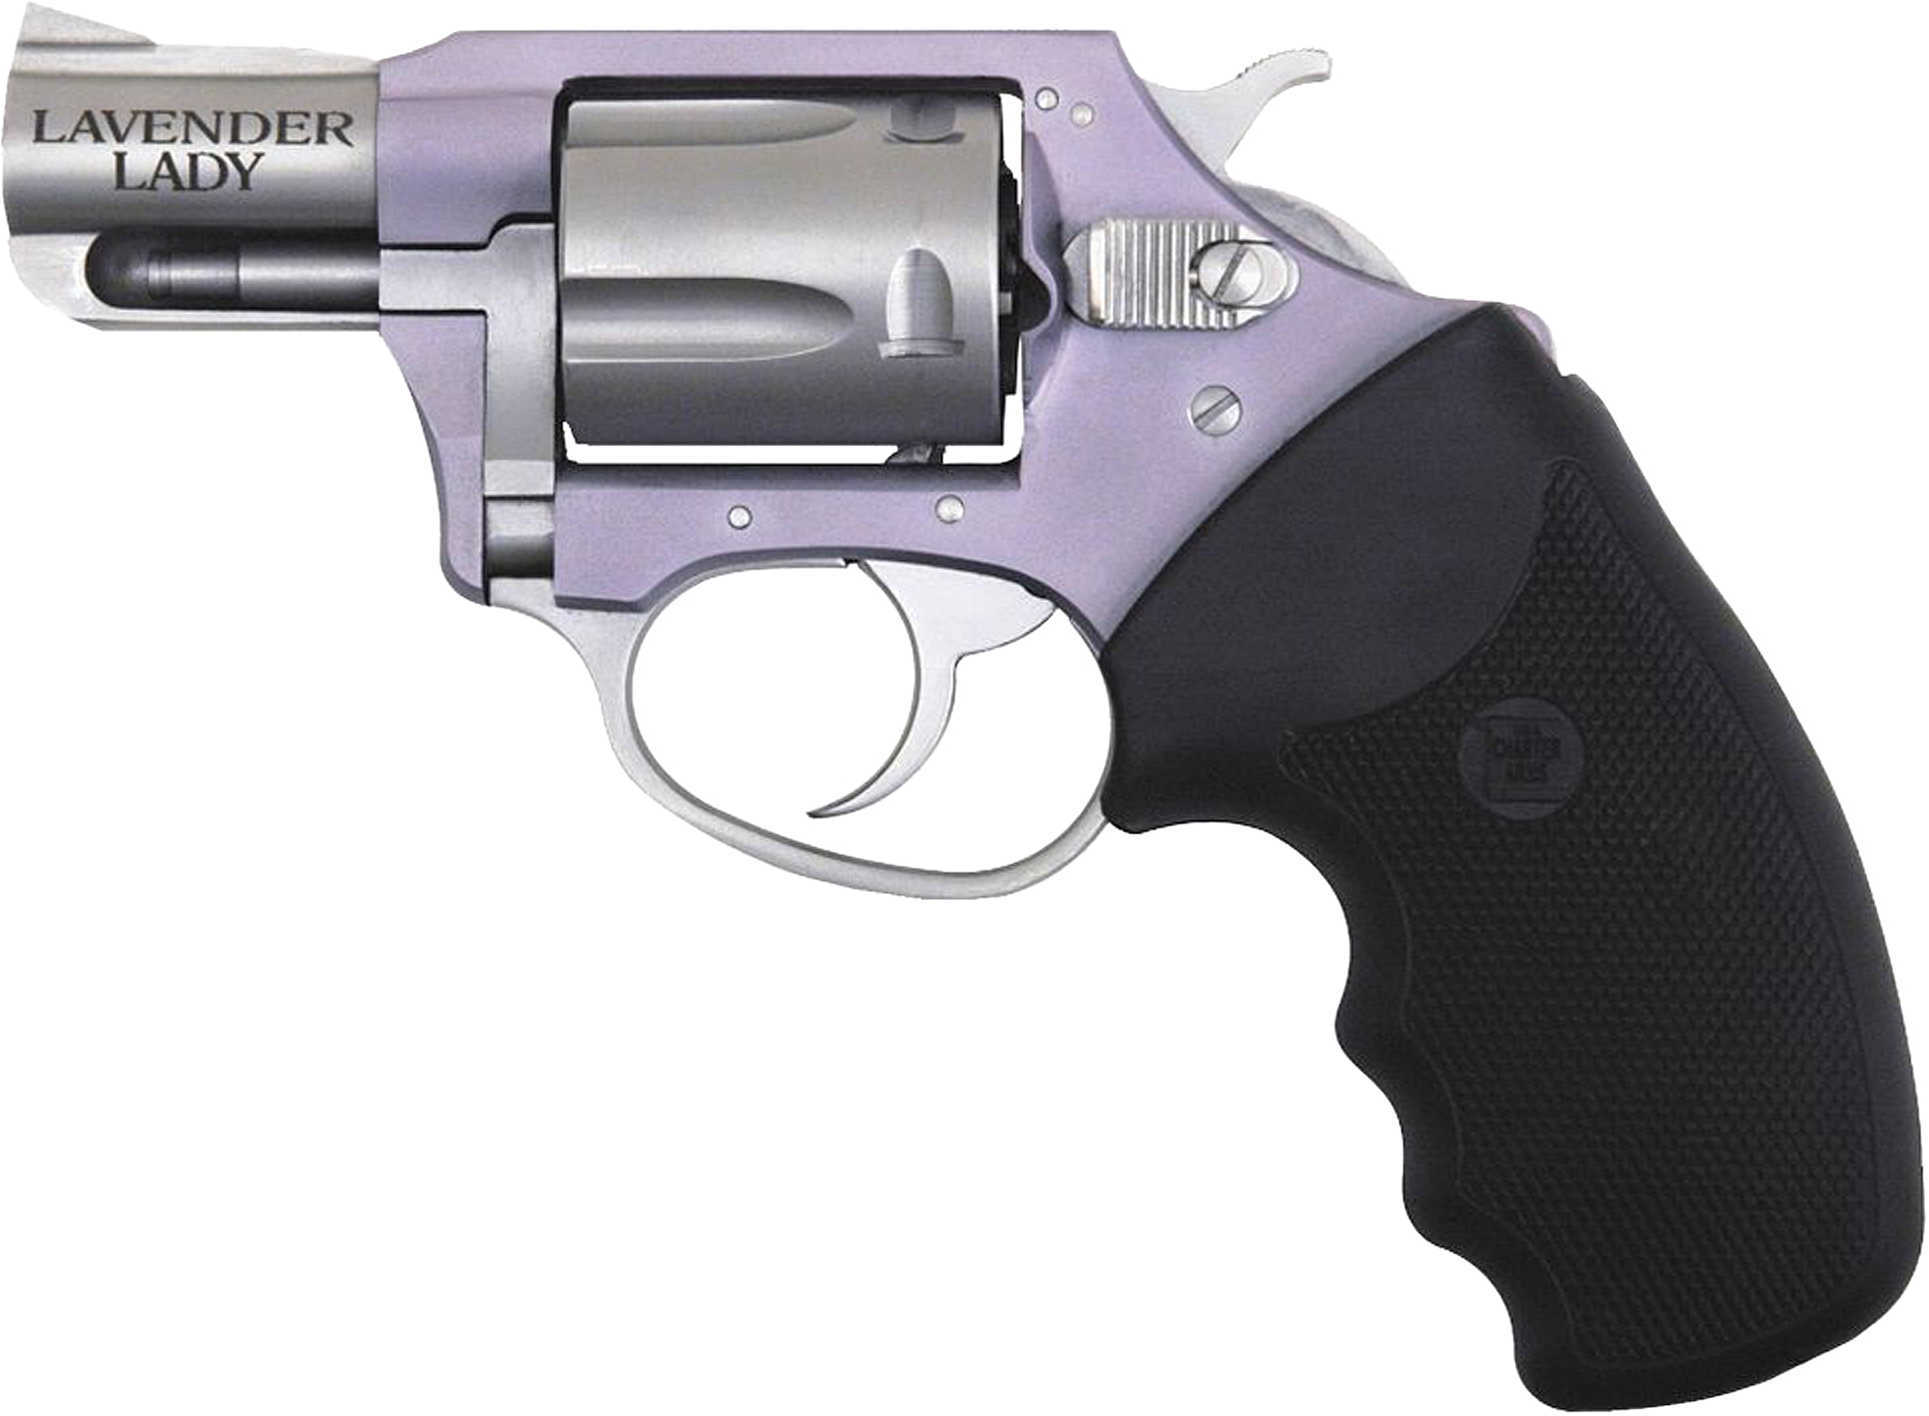 Charter Arms 38 Special Undercover Lite Lavender Lady 5 Round 2" Barrel Lavender/Stainless Steel Revolver 53840